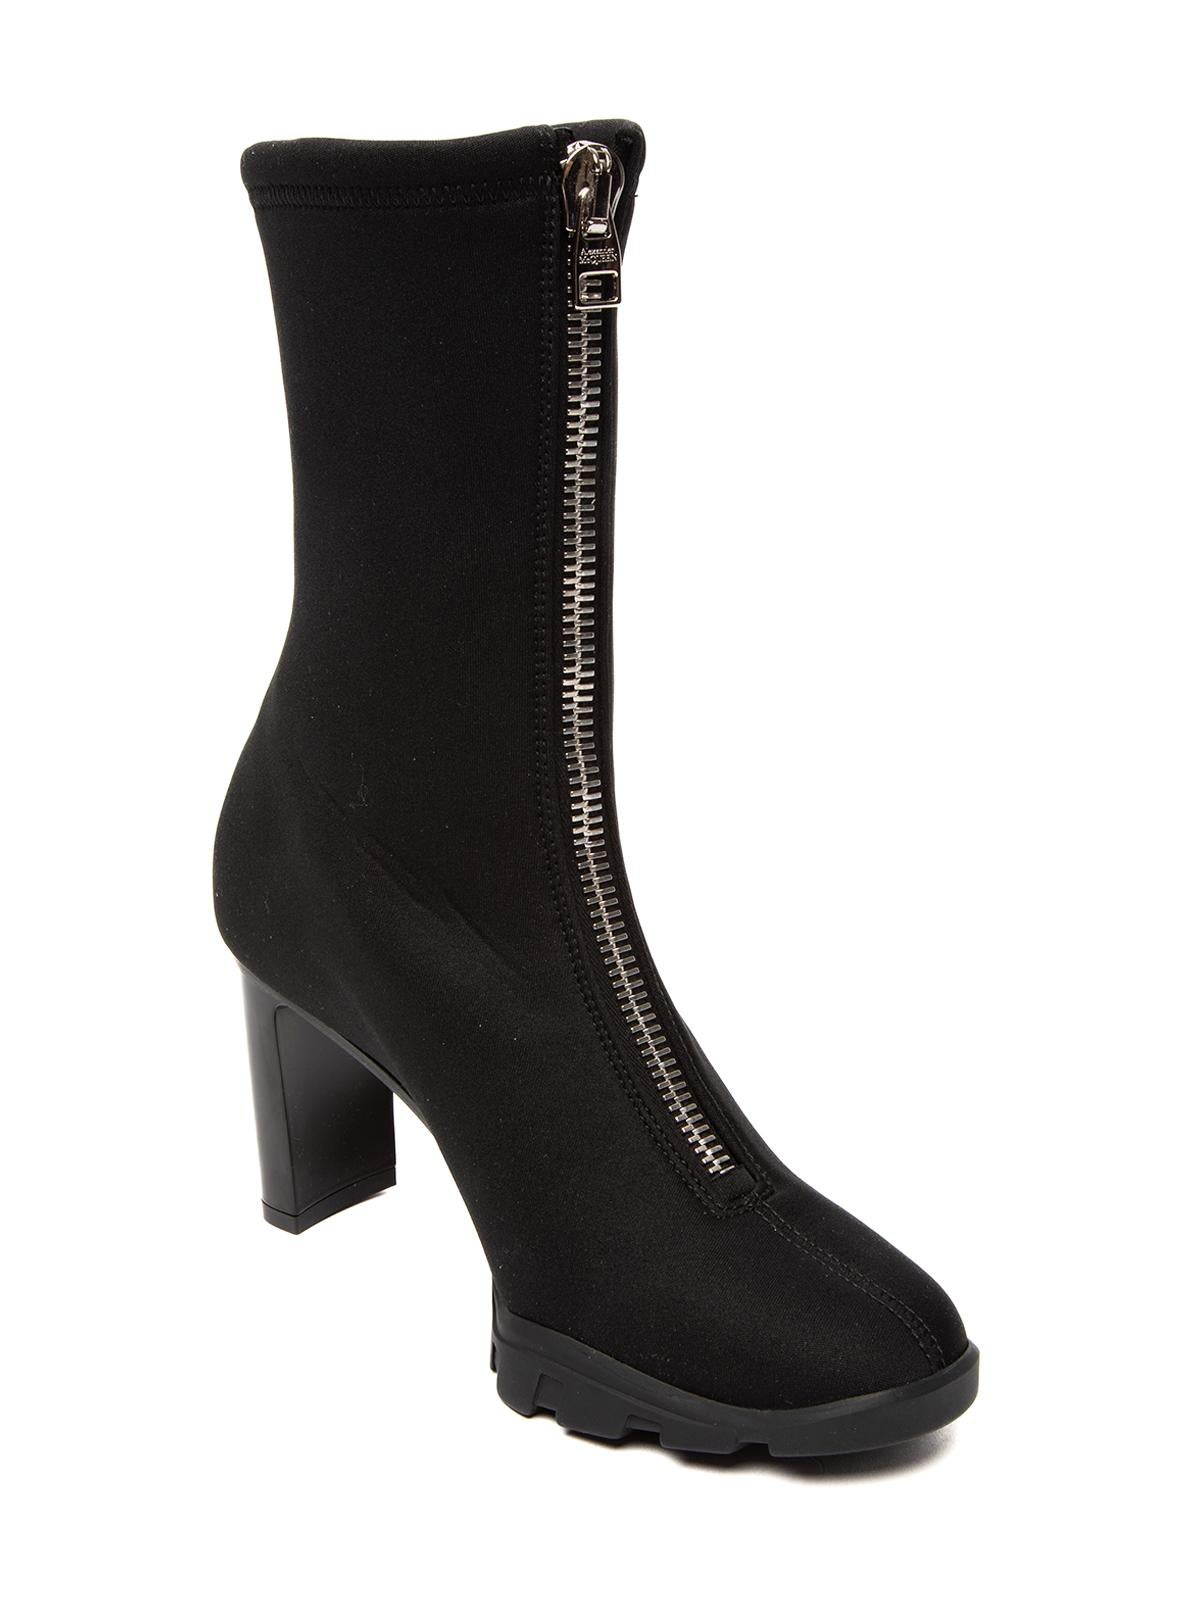 CONDITION is Never worn, with tag. No wear to Boots is evident. Minor defects near sole, and no dustbags included with this brand new Alexander McQueen designer resale item. Details Black Neoprene Rubber sole Round toe Zip up fastening Leather